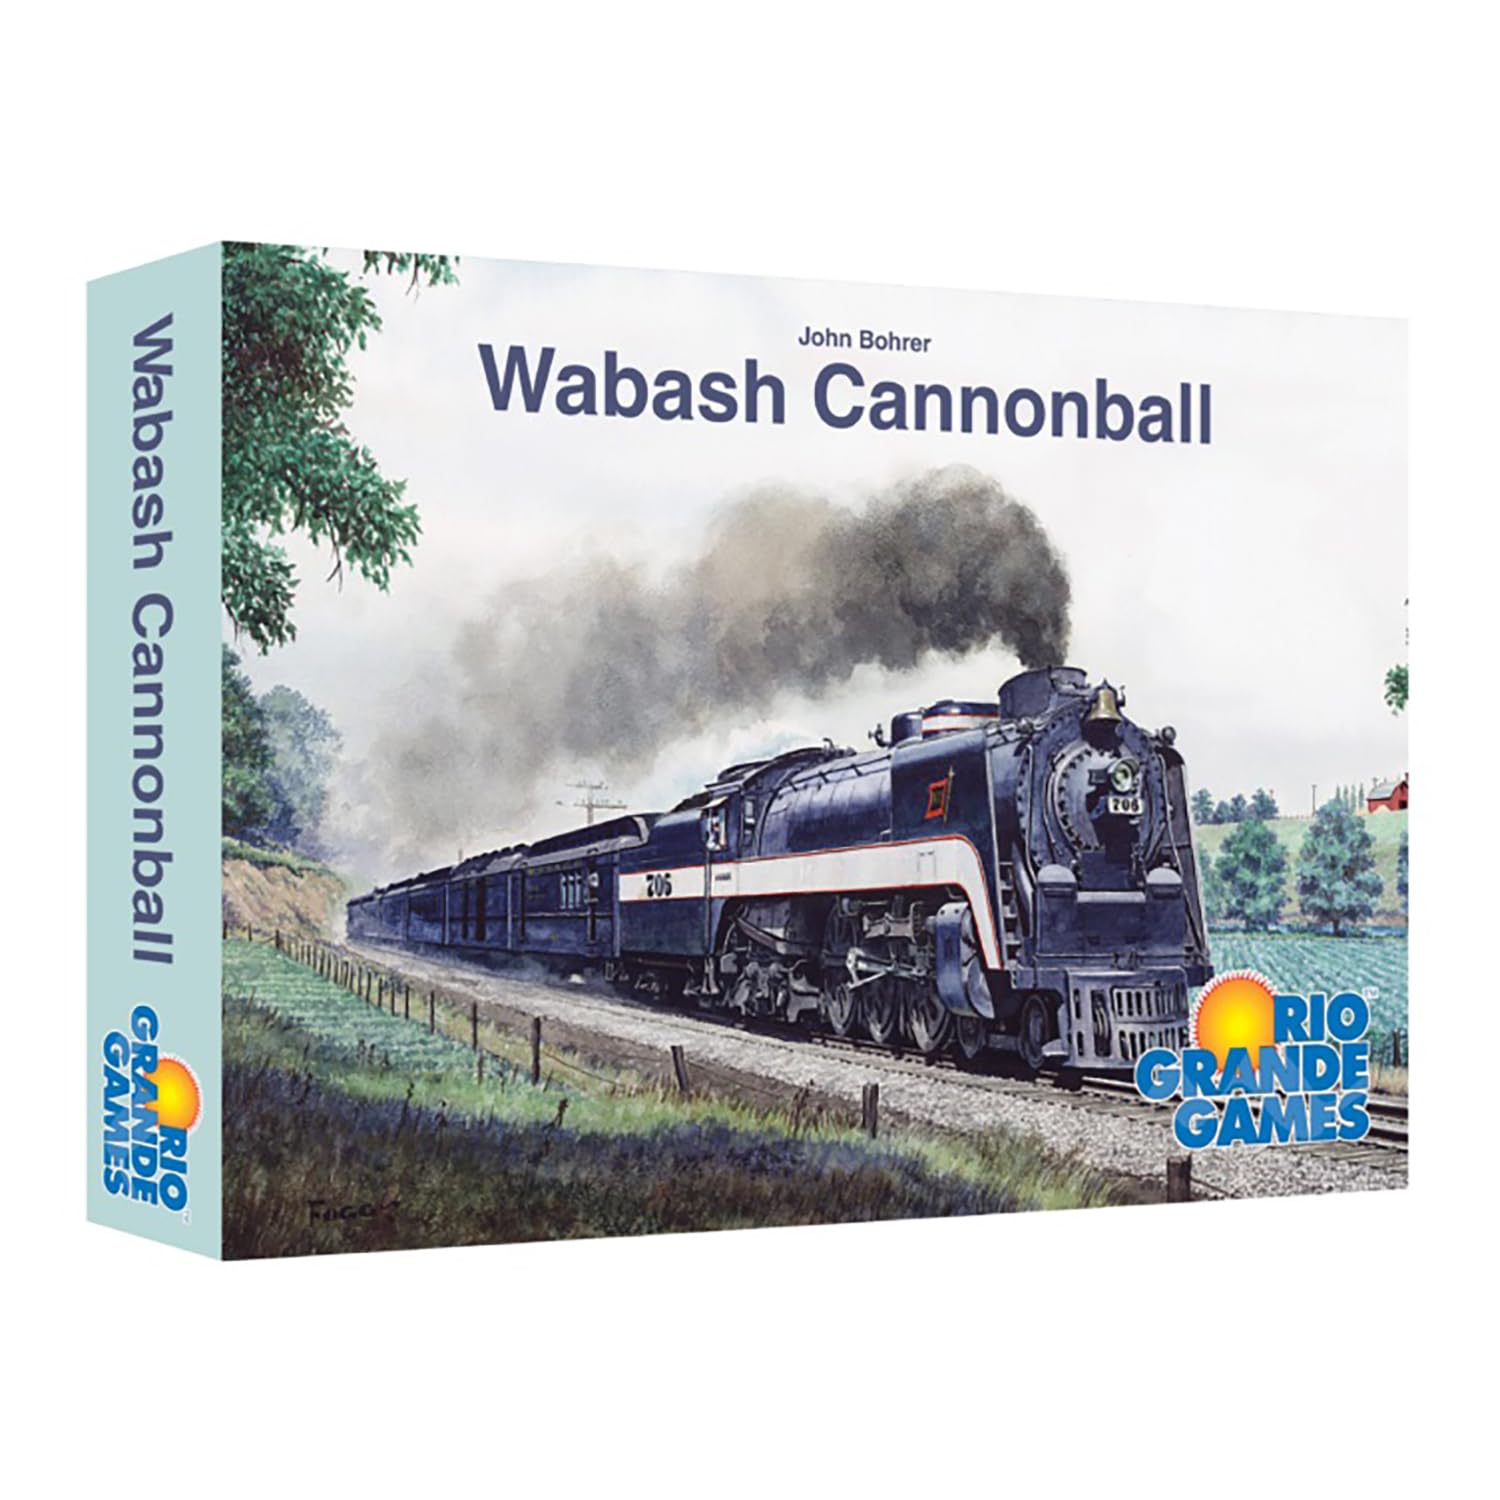 Rio Grande Games Board Games Rio Grande Games Wabash Cannonball